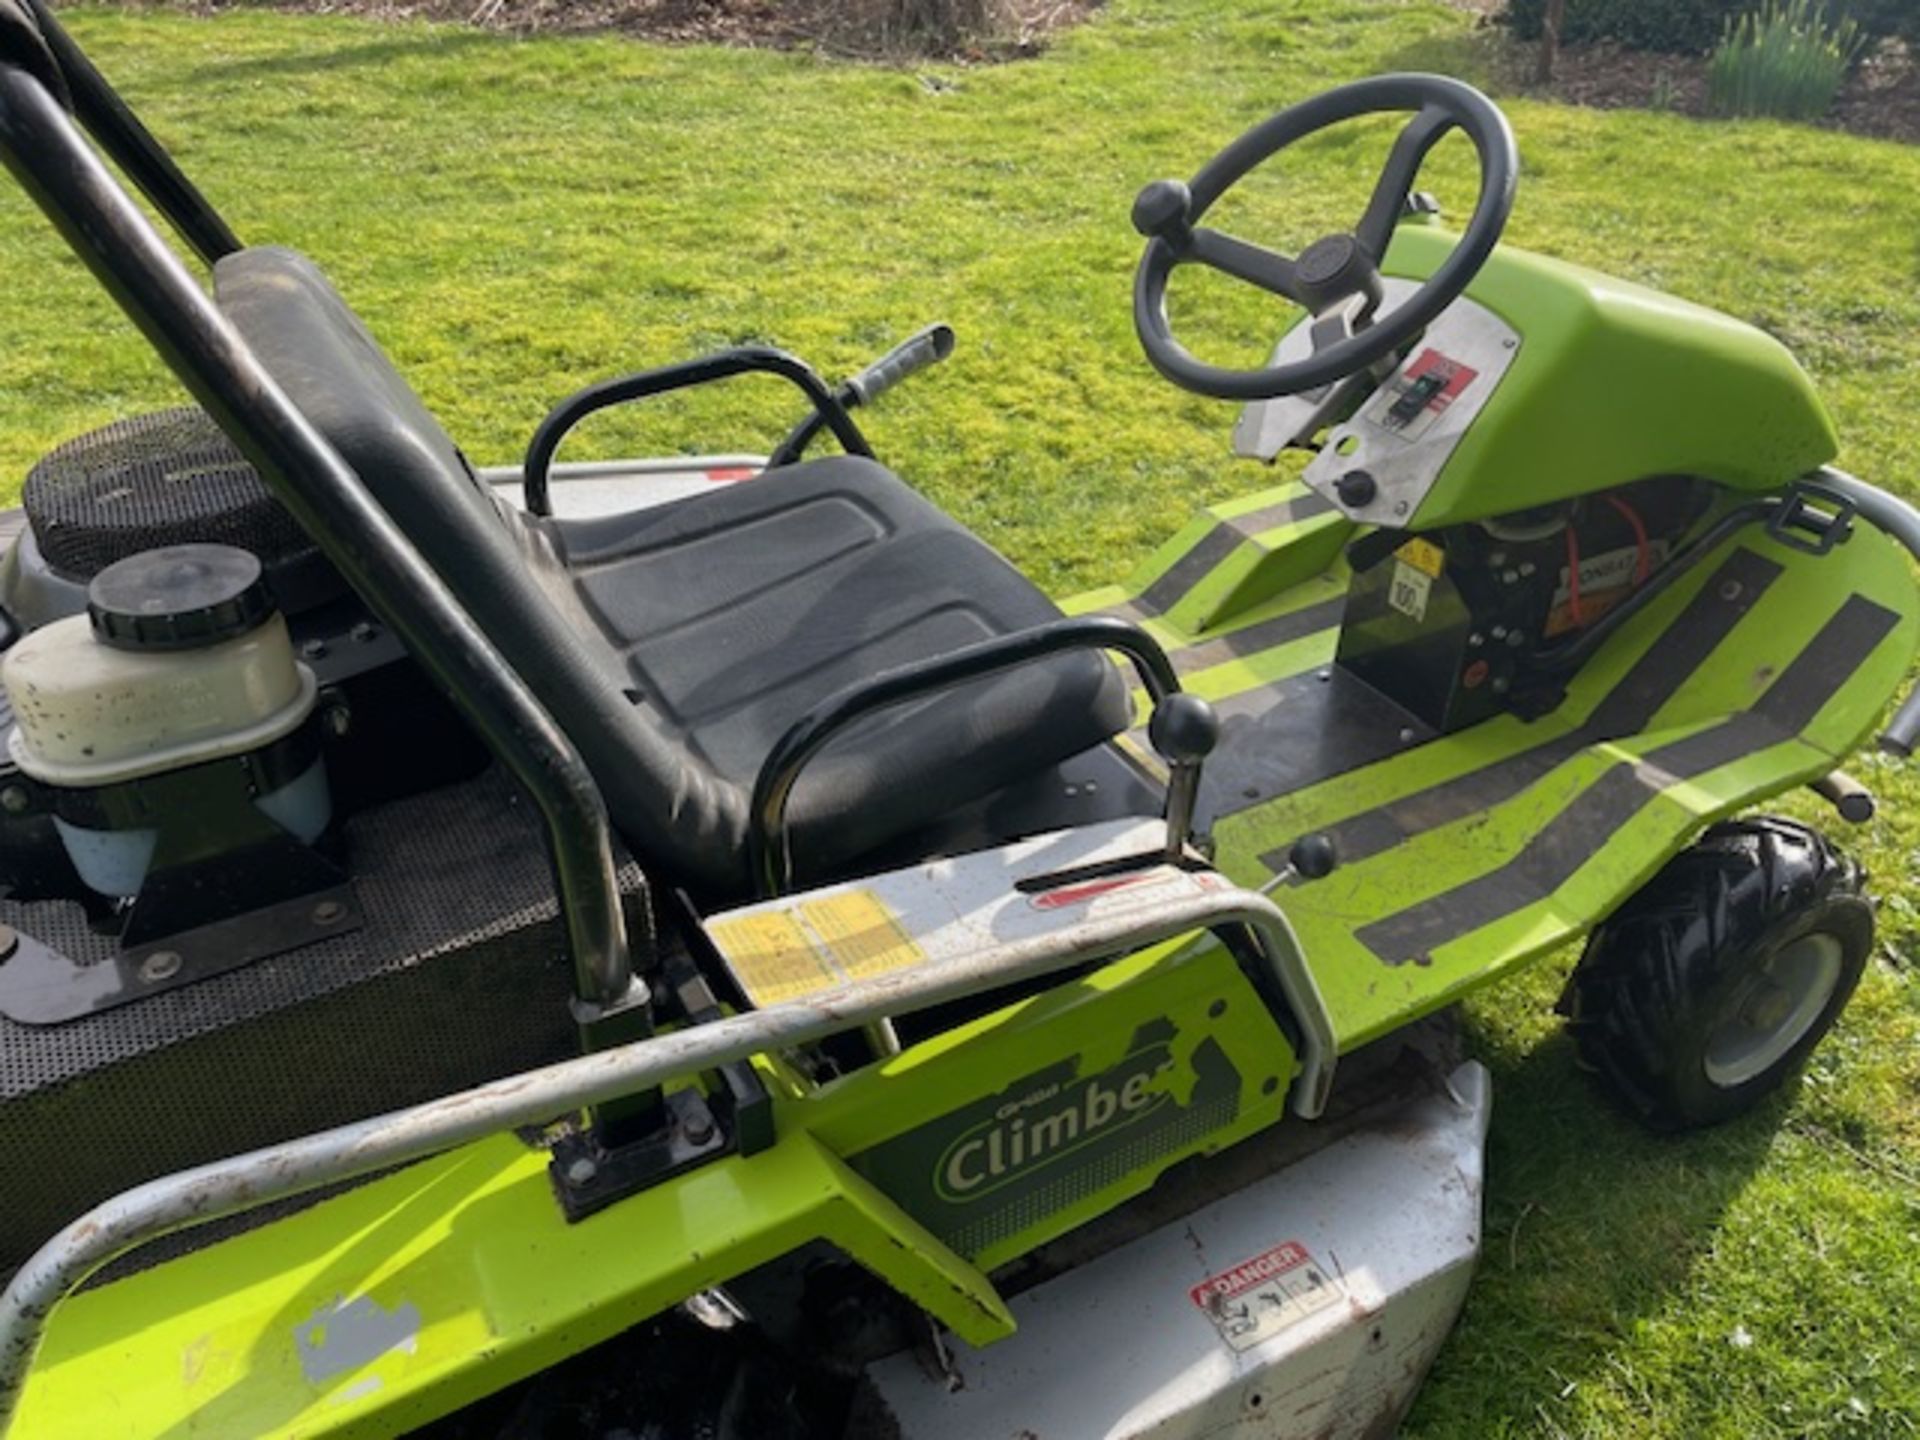 2007, GRILLO CLIMBER 9.21 SERIES RIDE ON MOWER - Image 8 of 10